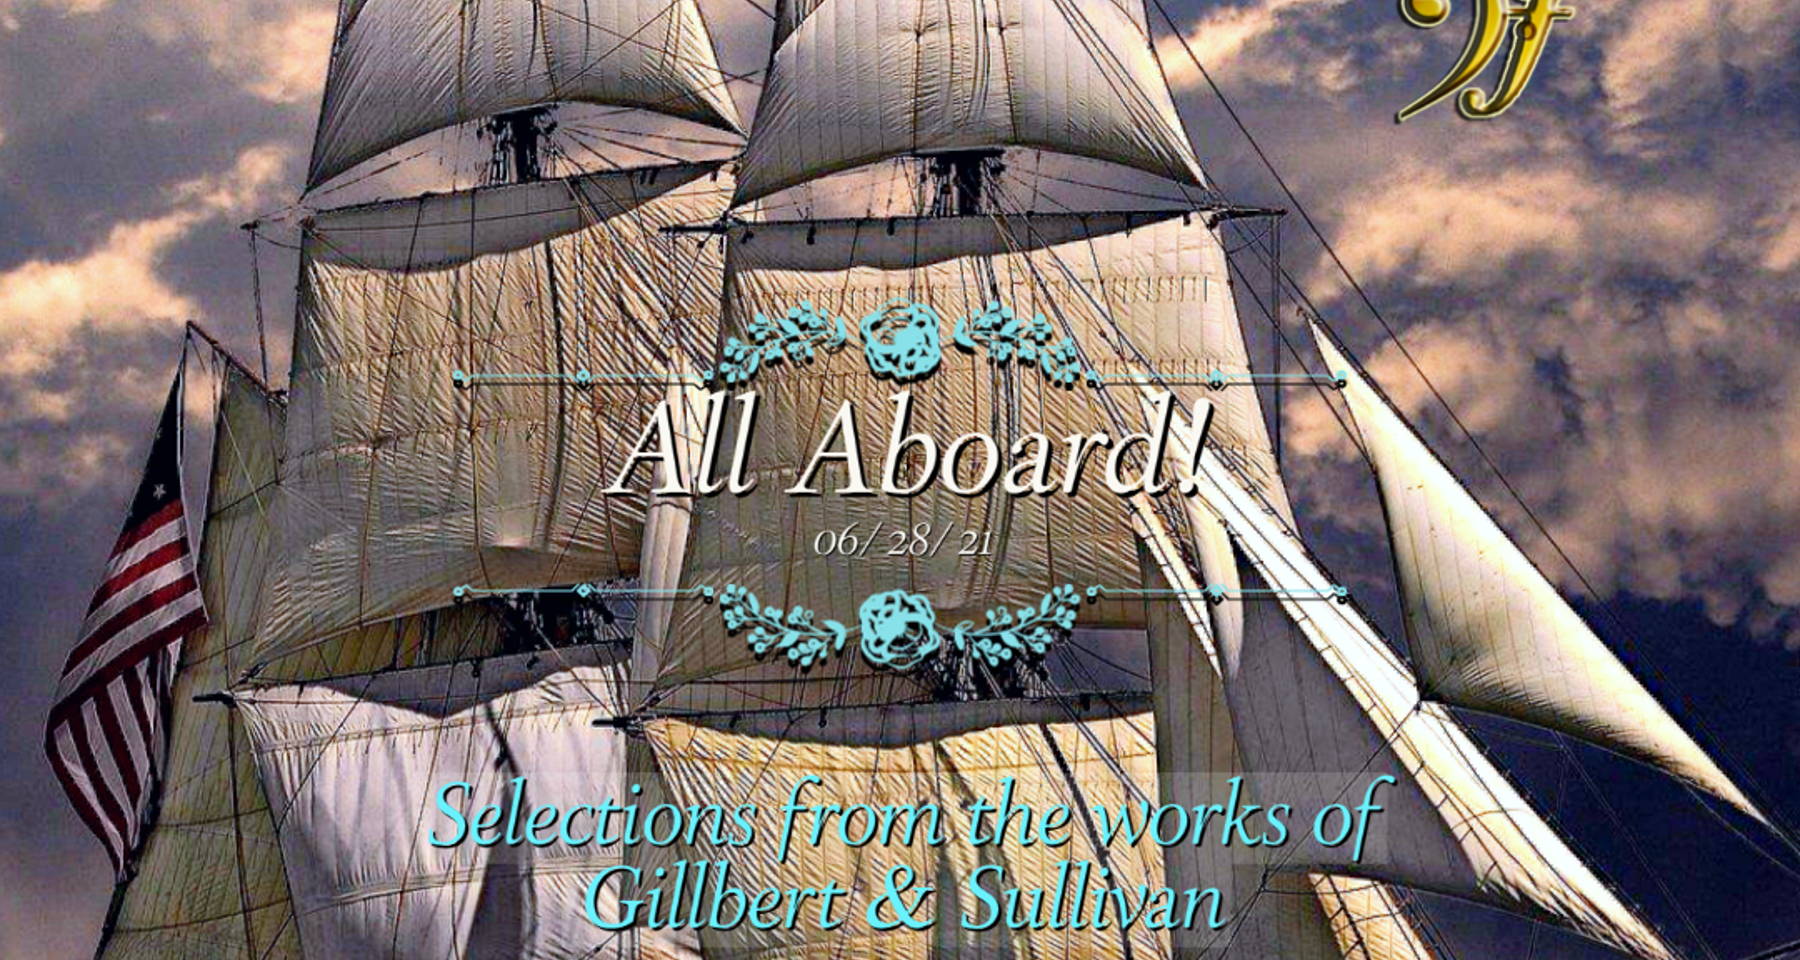 All Aboard the HMS Pinafore (and other songs by Gillbert and Sullivan)